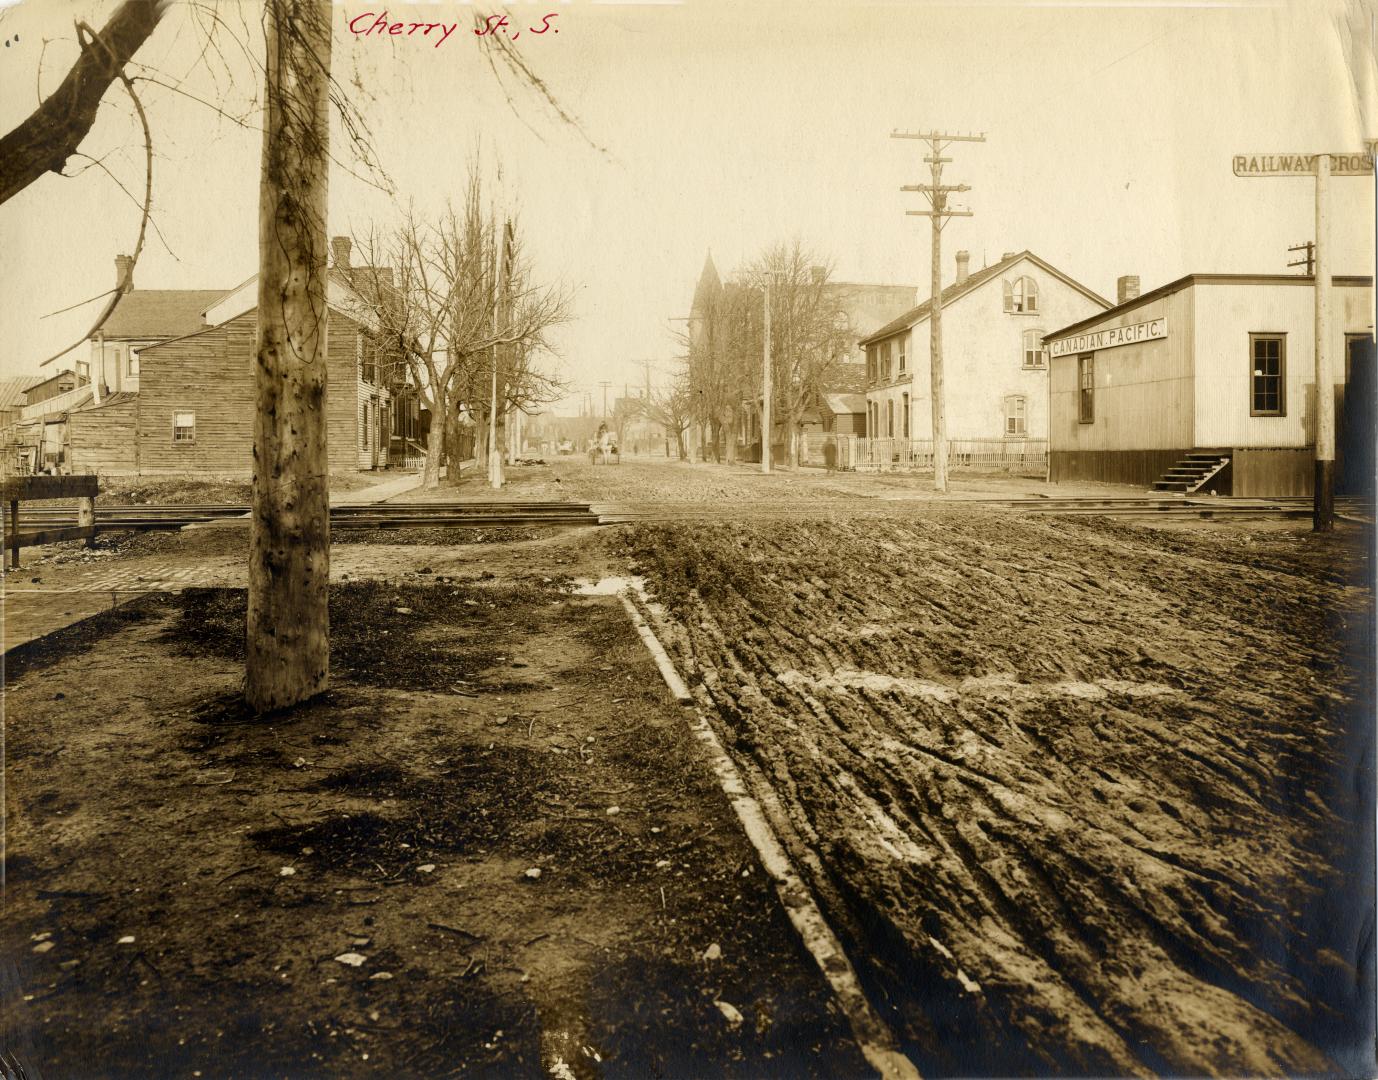 Cherry St., looking north from north of Mill St., across C.P.R. tracks towards Front Street East